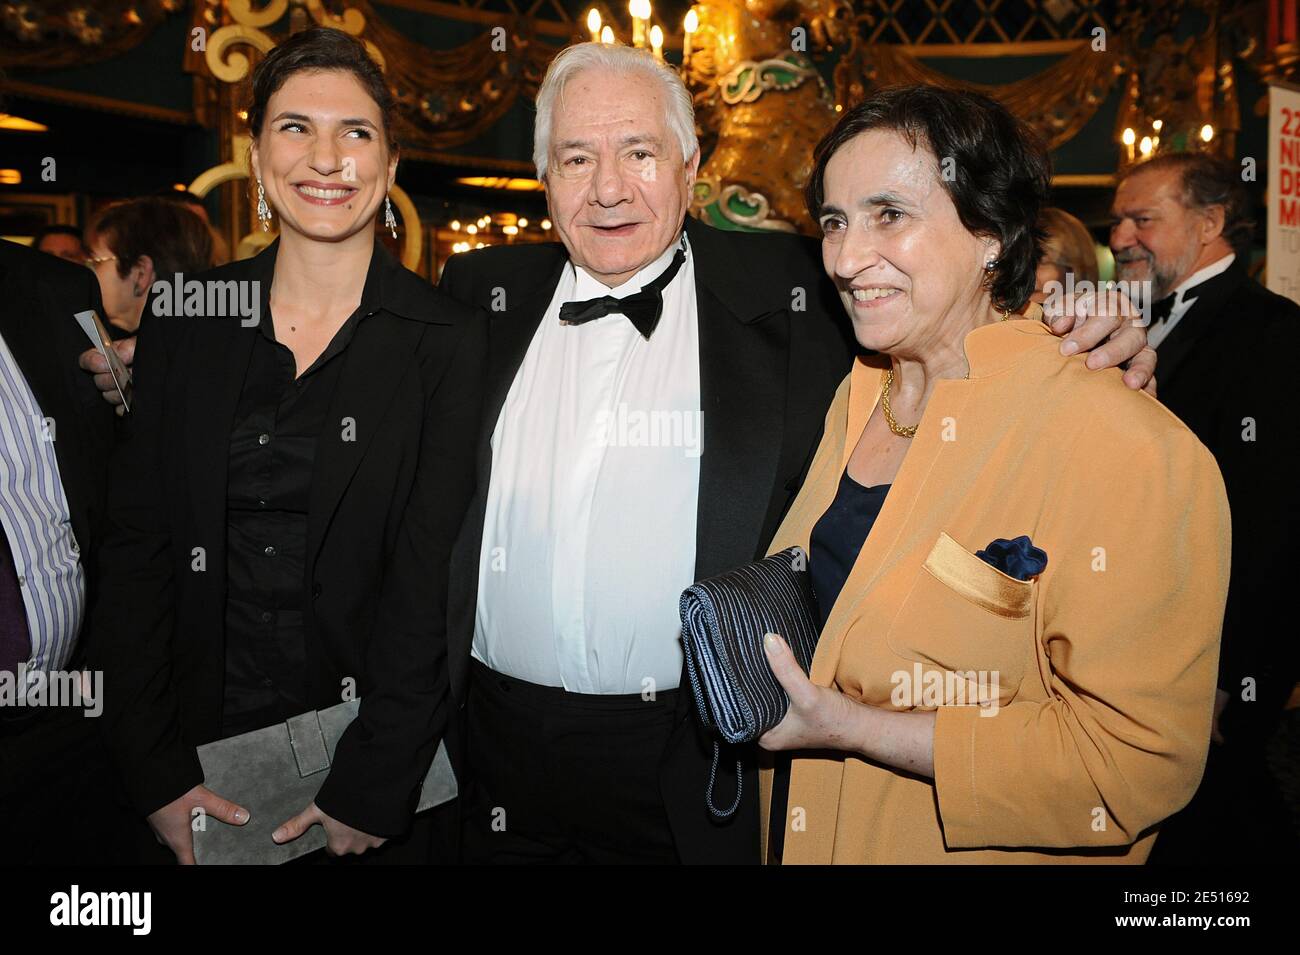 Michel Galabru with wife and daughter attend the 22nd Molieres theatre awards ceremony at the Folies Bergere in Paris, France on April 28, 2008. Photo by Orban-Gouhier/ABACAPRESS.COM Stock Photo